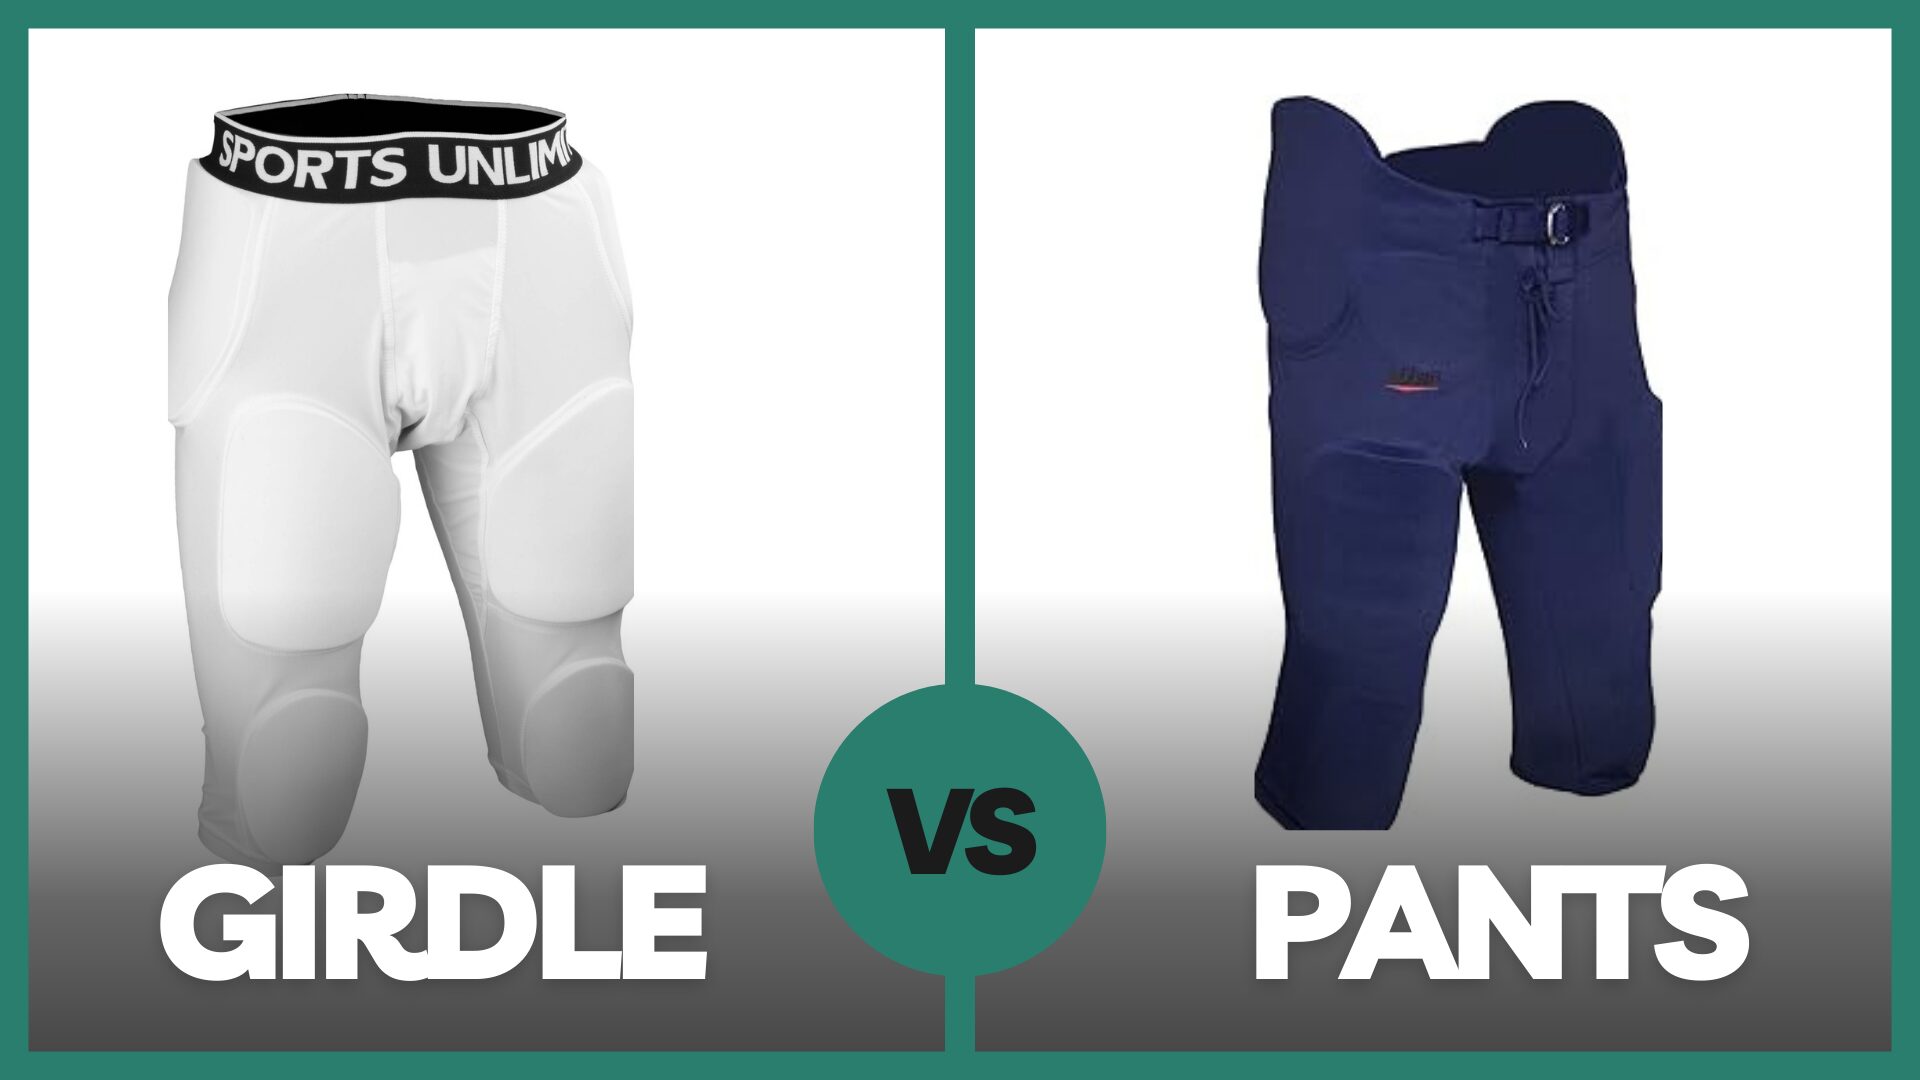 What is the Difference Between Football Pants and Girdle?